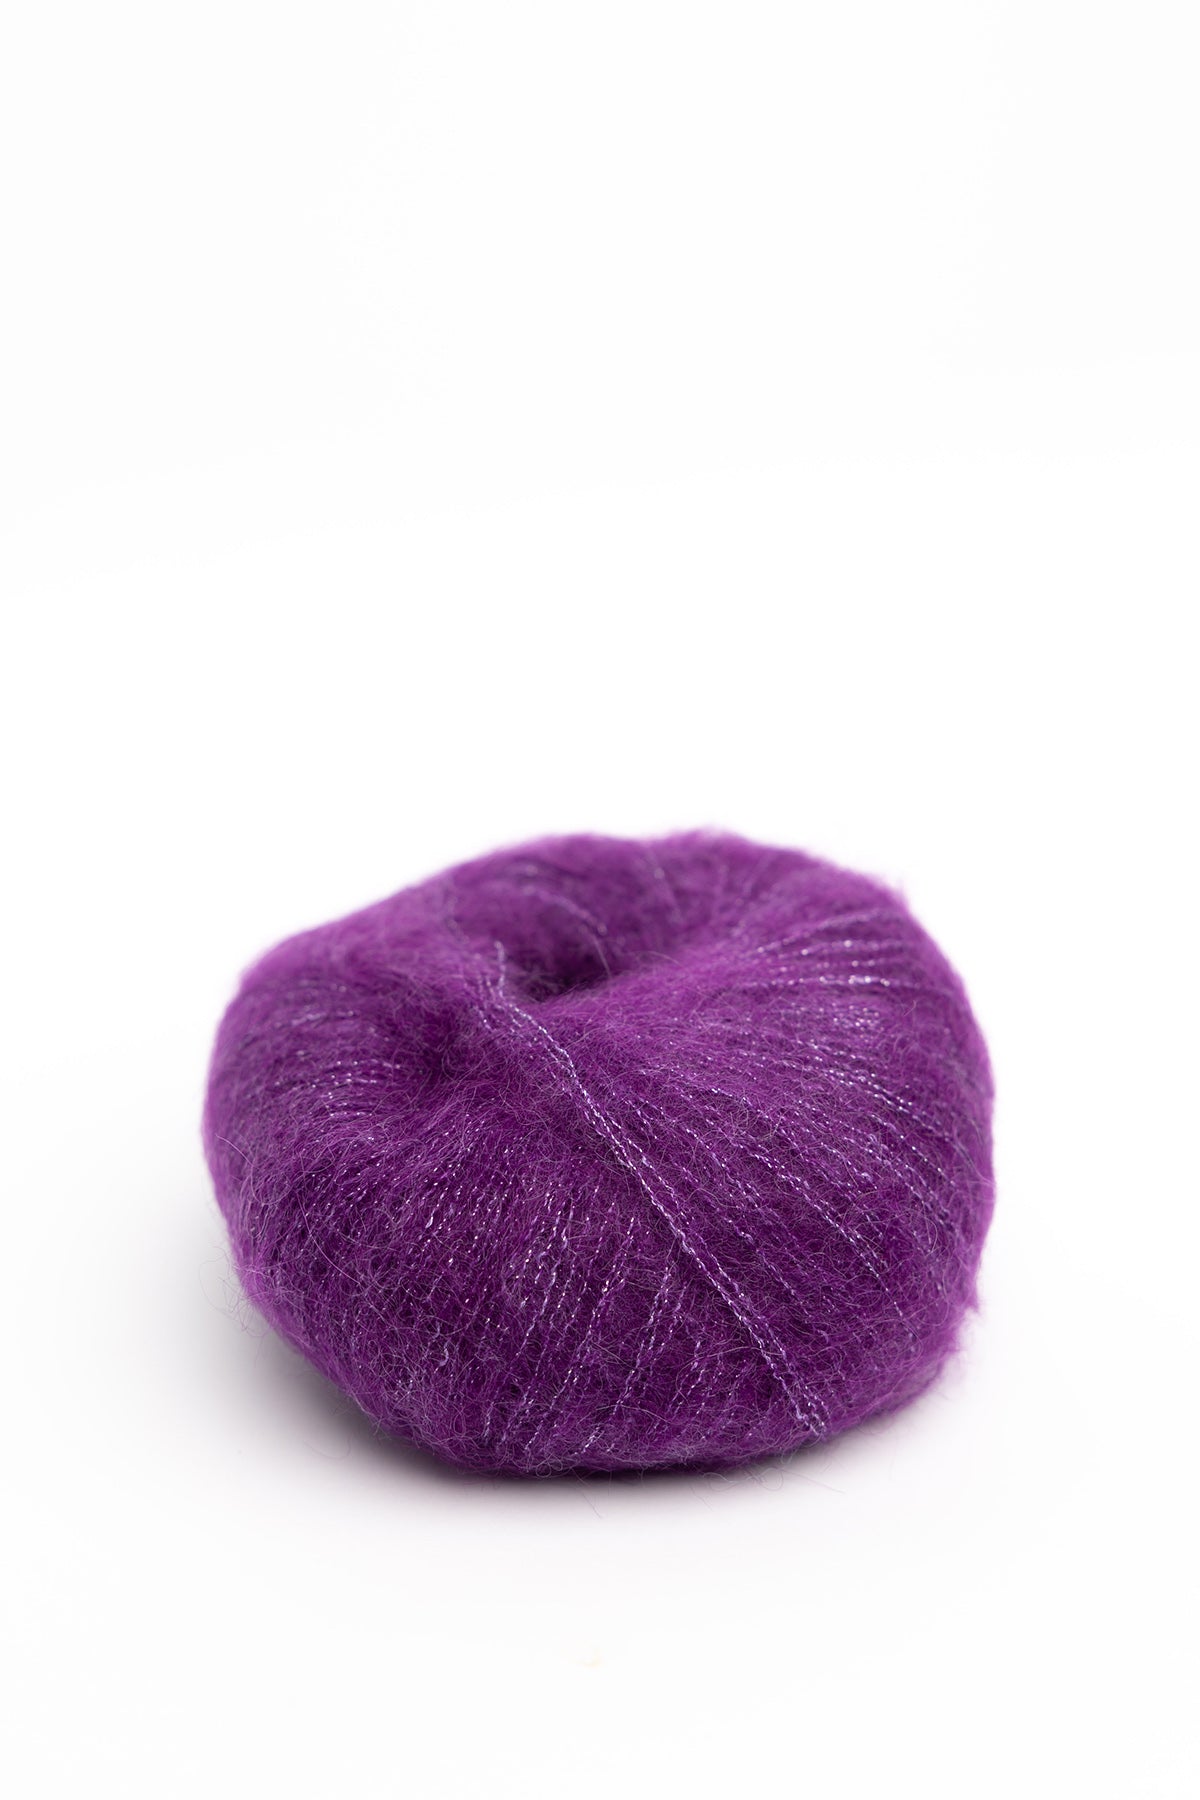 Silk Mohair Lux Lana Gatto  Shop Yarn Online Today - Beehive Wool